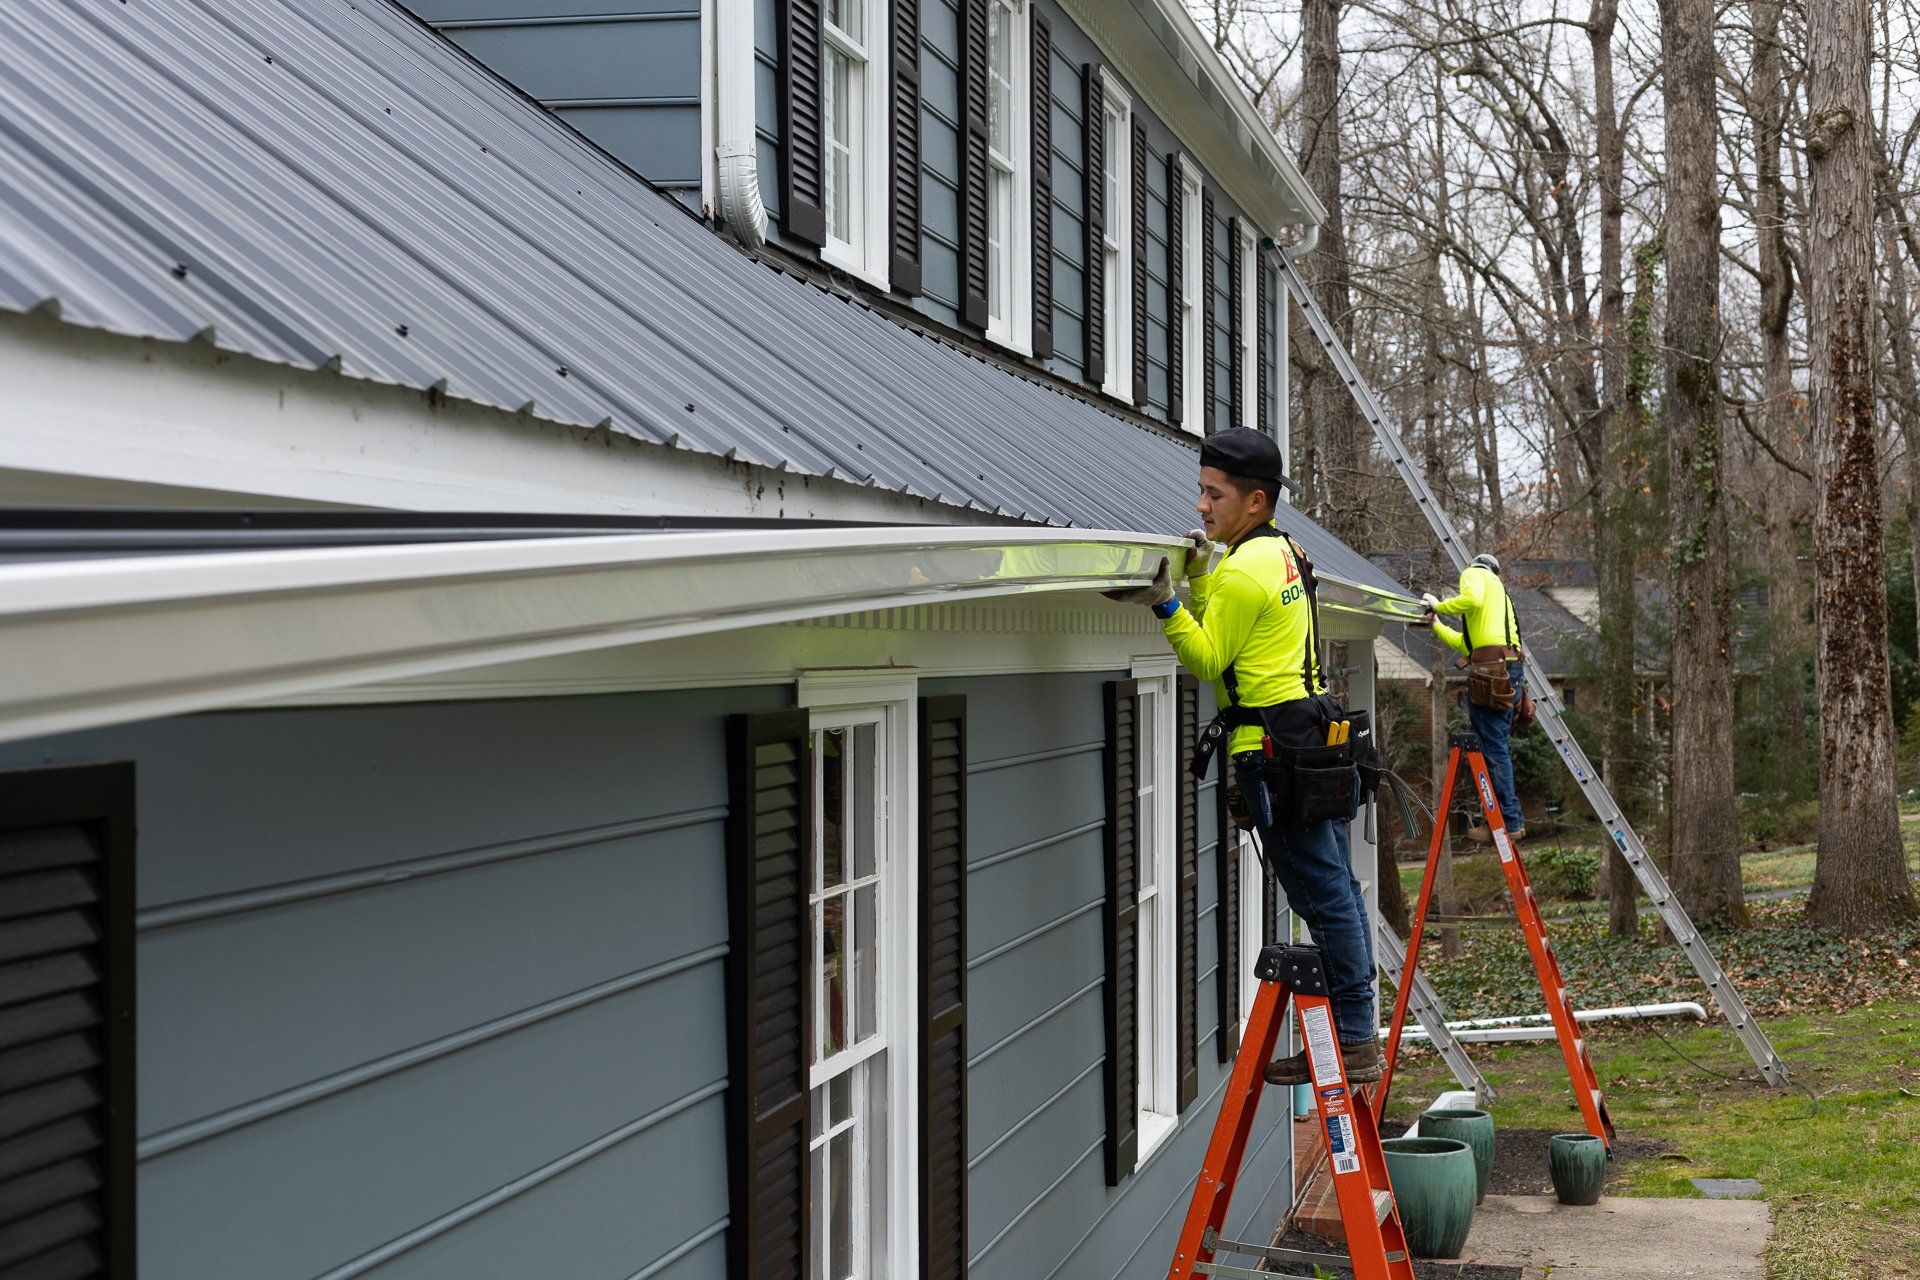 A Retex crew installs new PlyGem DuoPro gutters on a home.